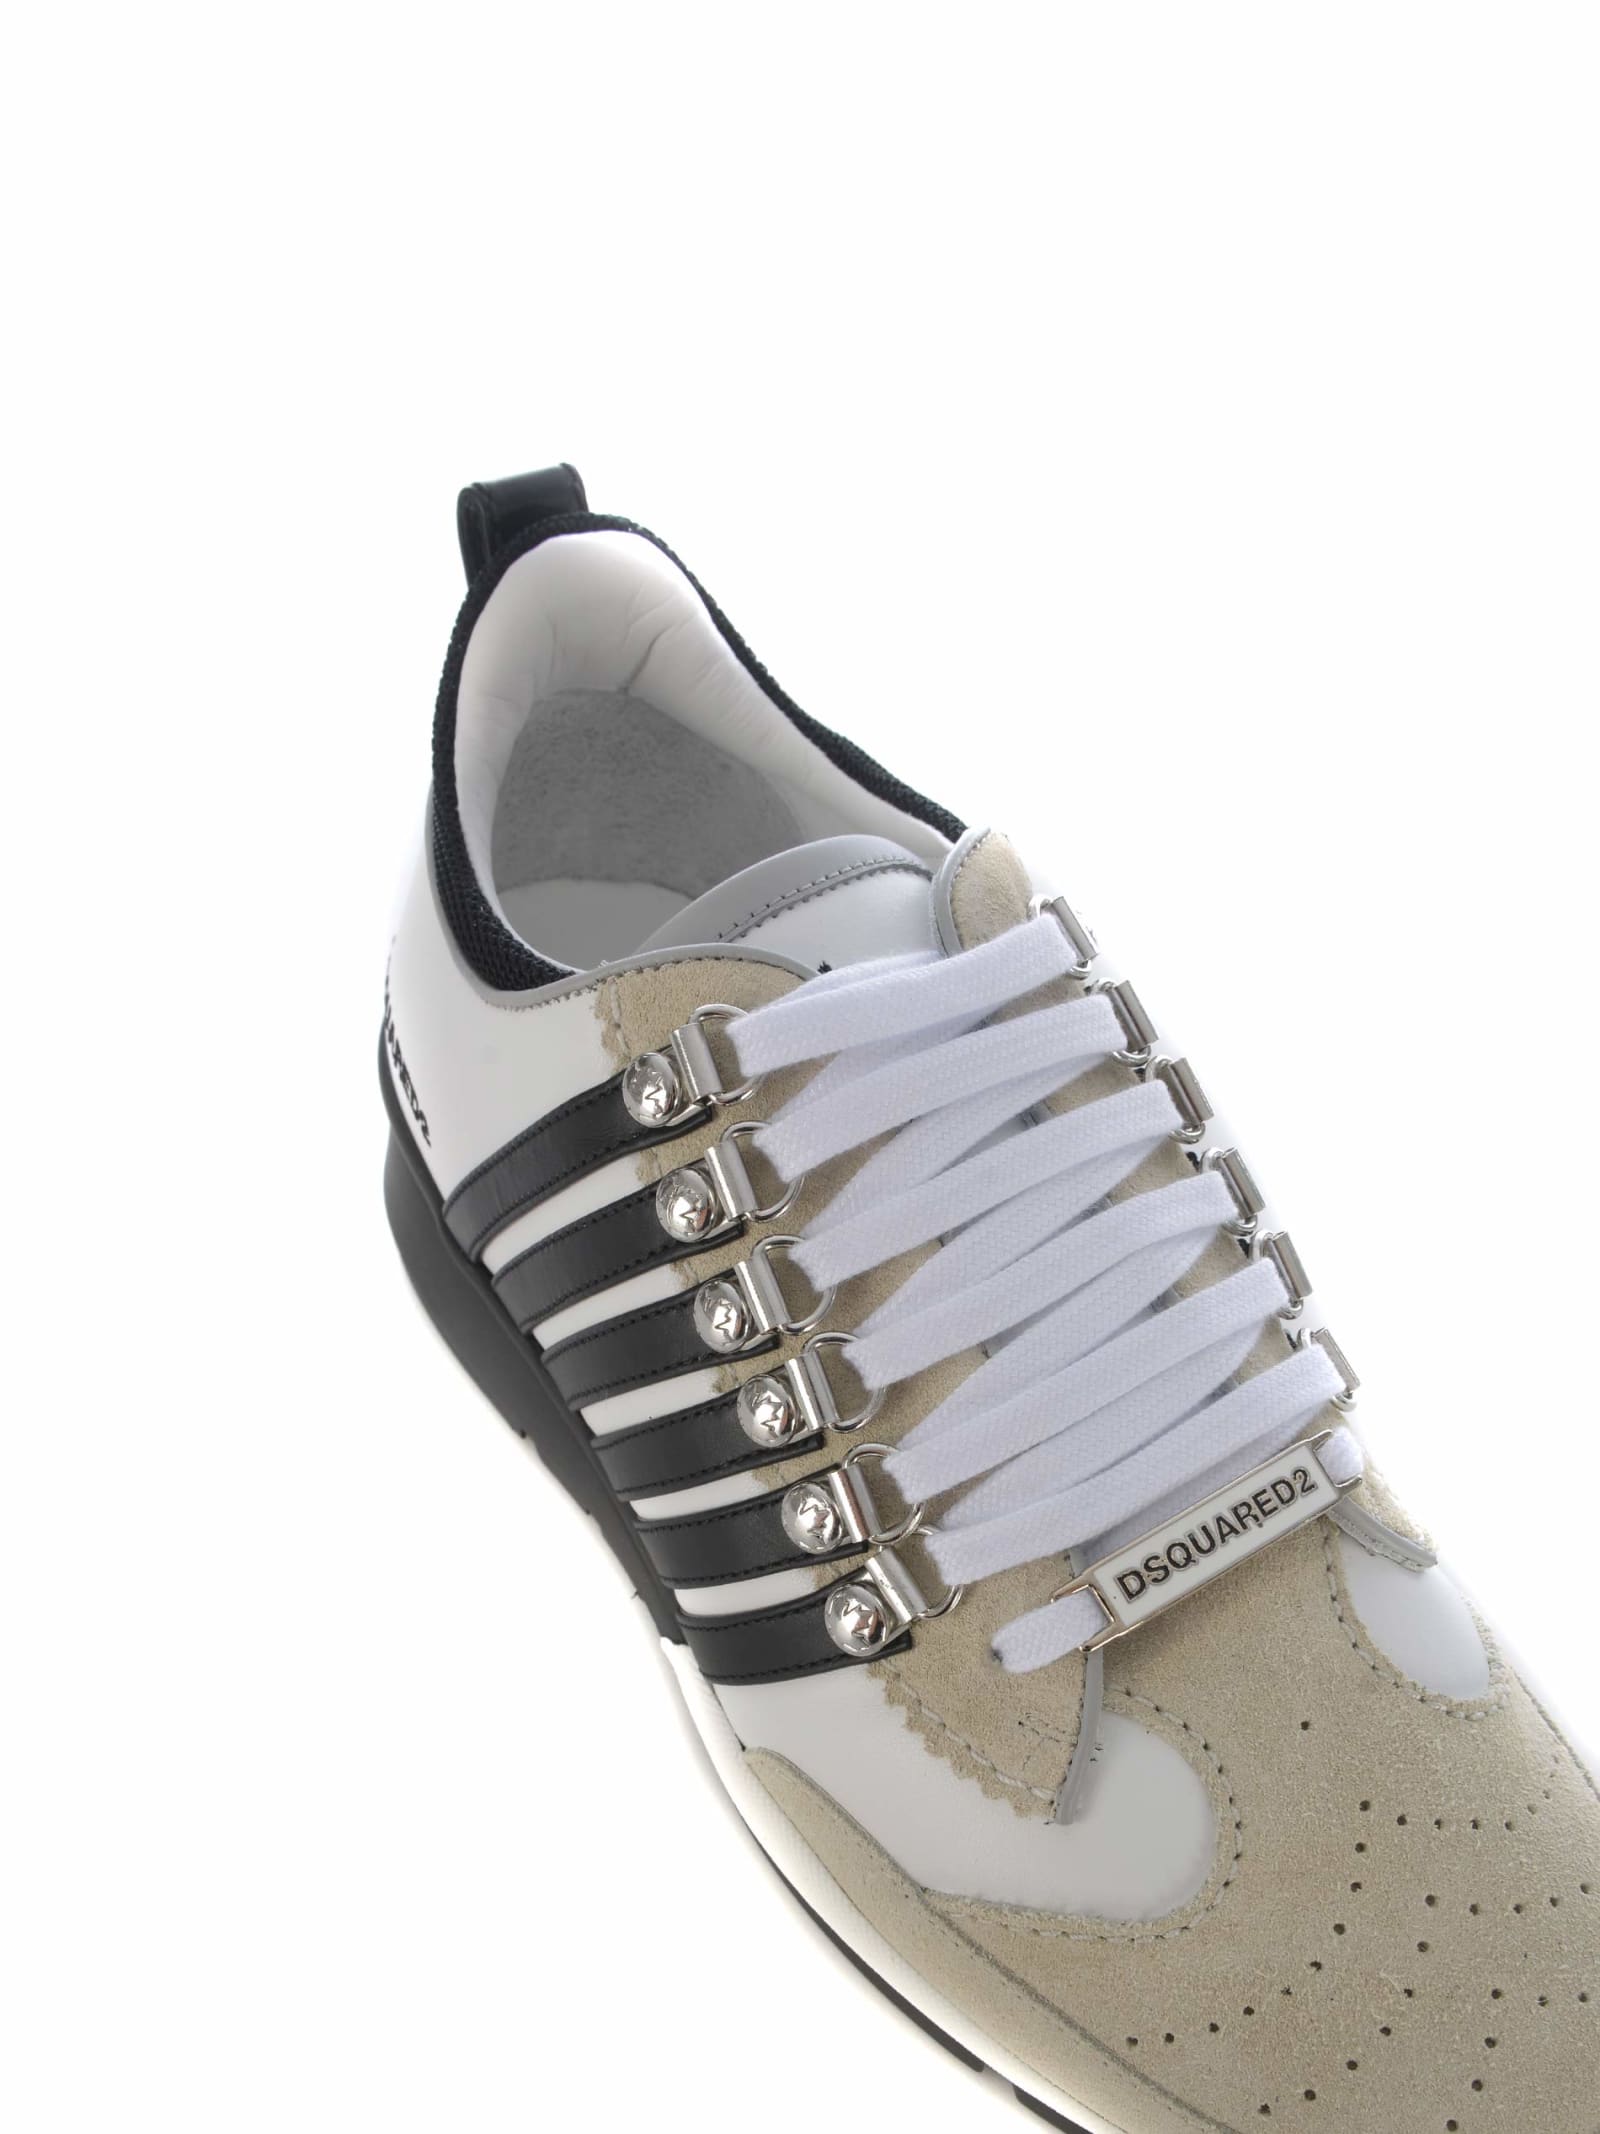 Shop Dsquared2 Sneakers Dsquarerd2 Legendary In Leather In Bianco Nero